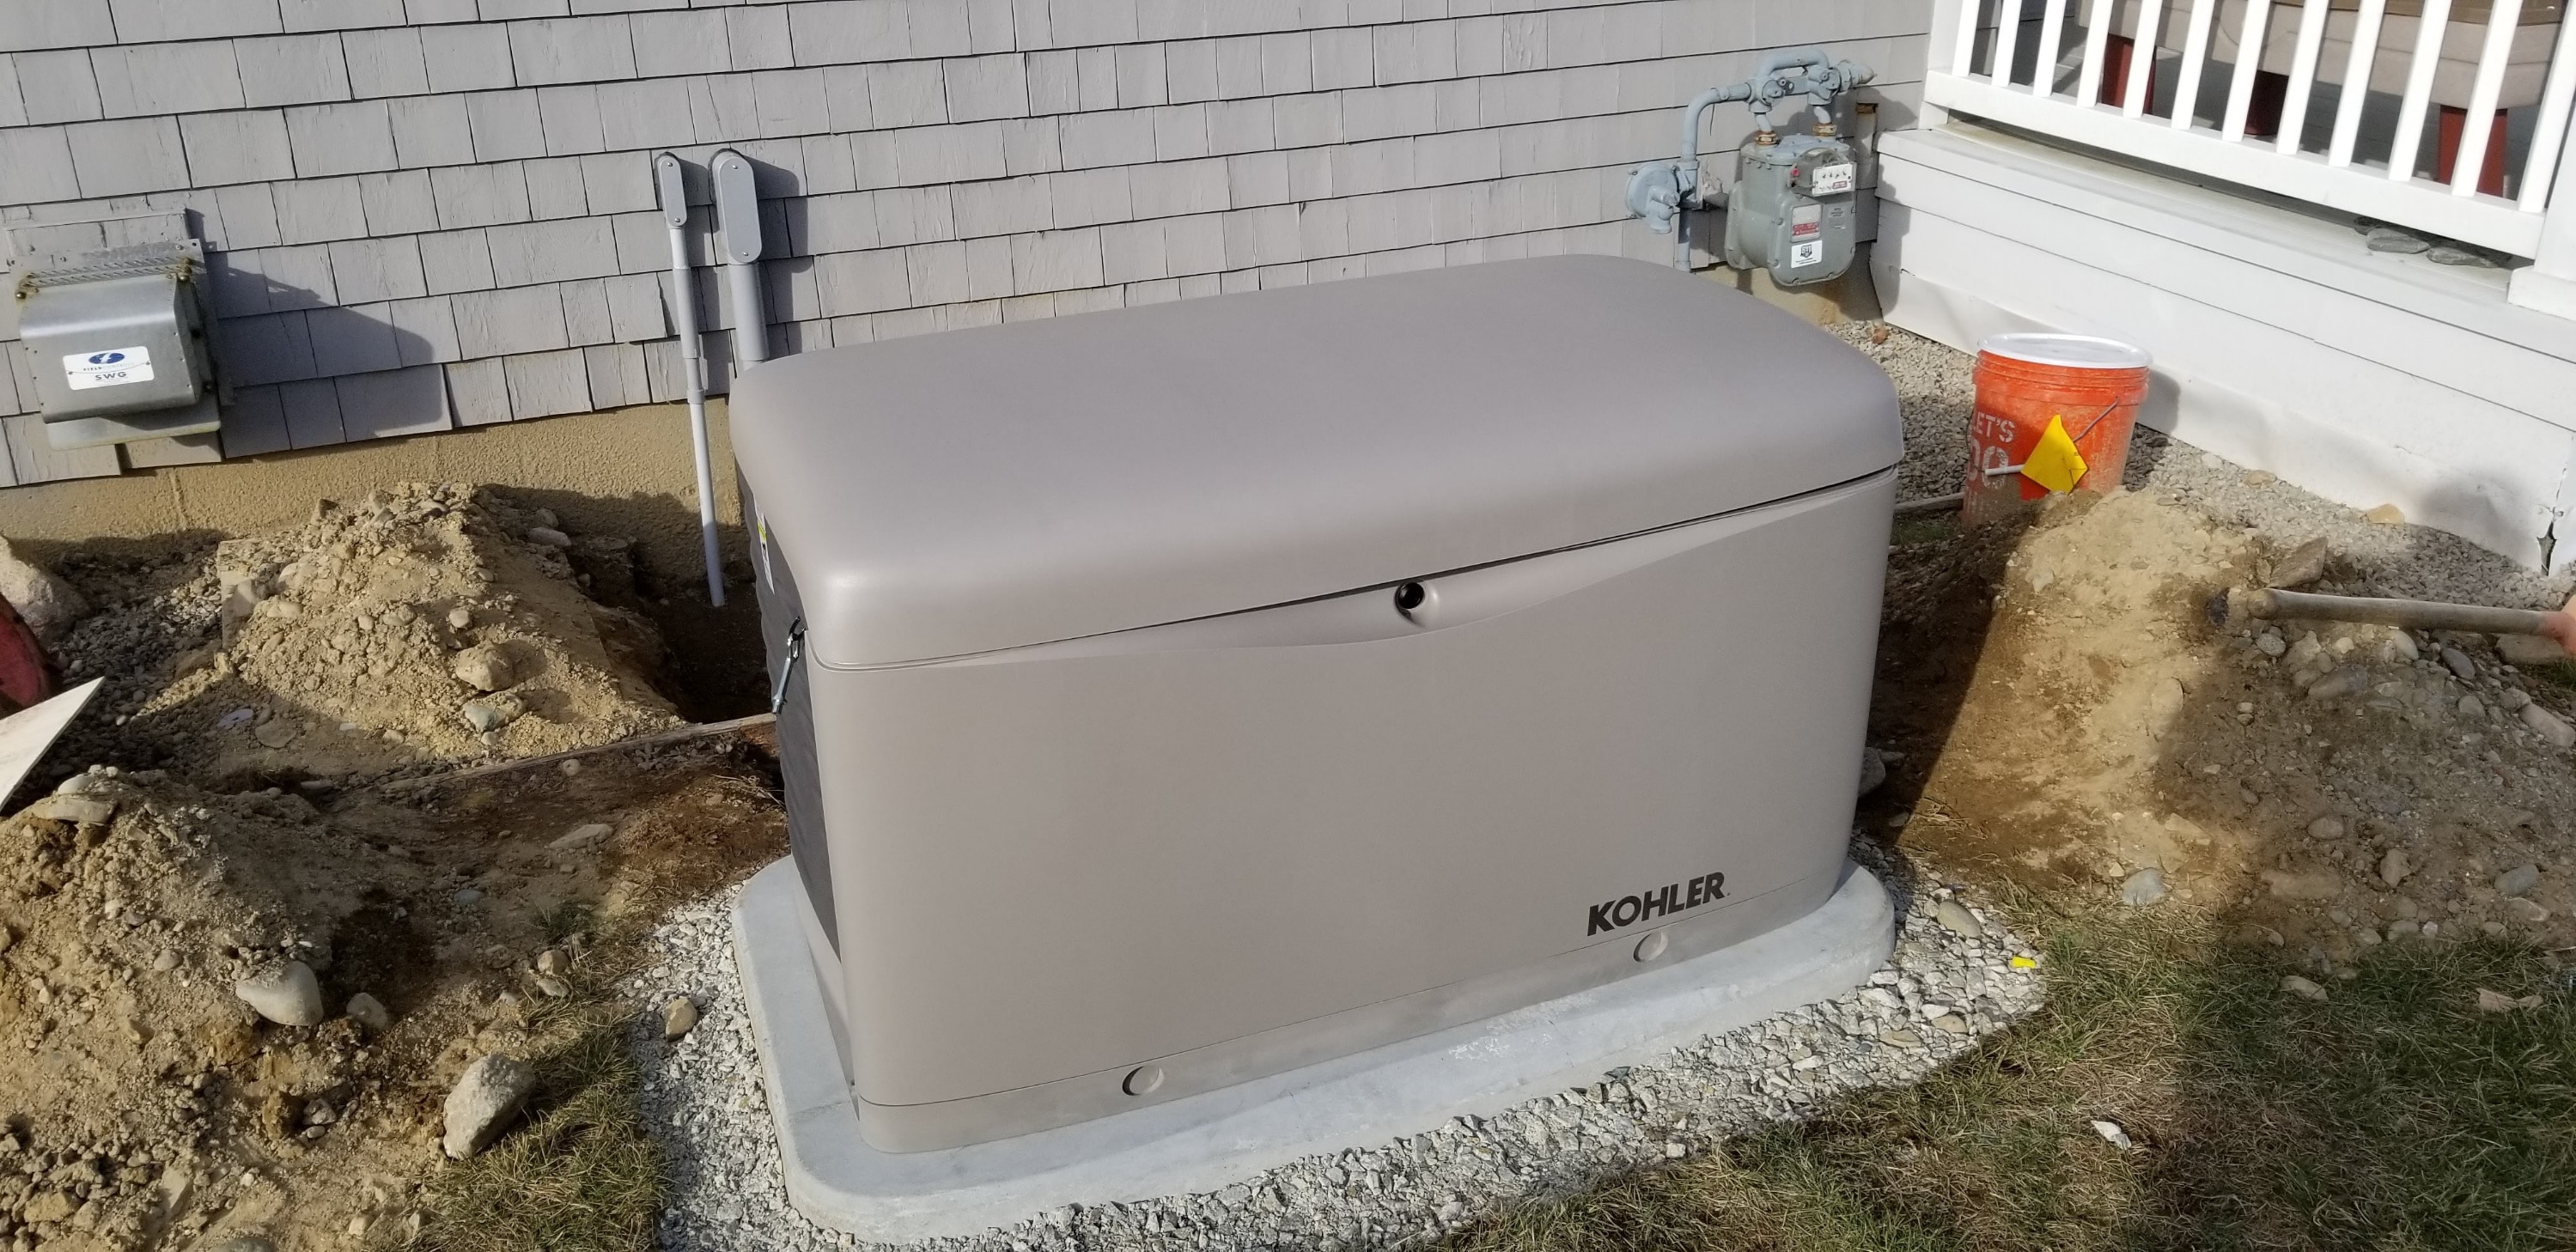 6 Best Kohler Generators – Reviews of the Top Models from the Brand